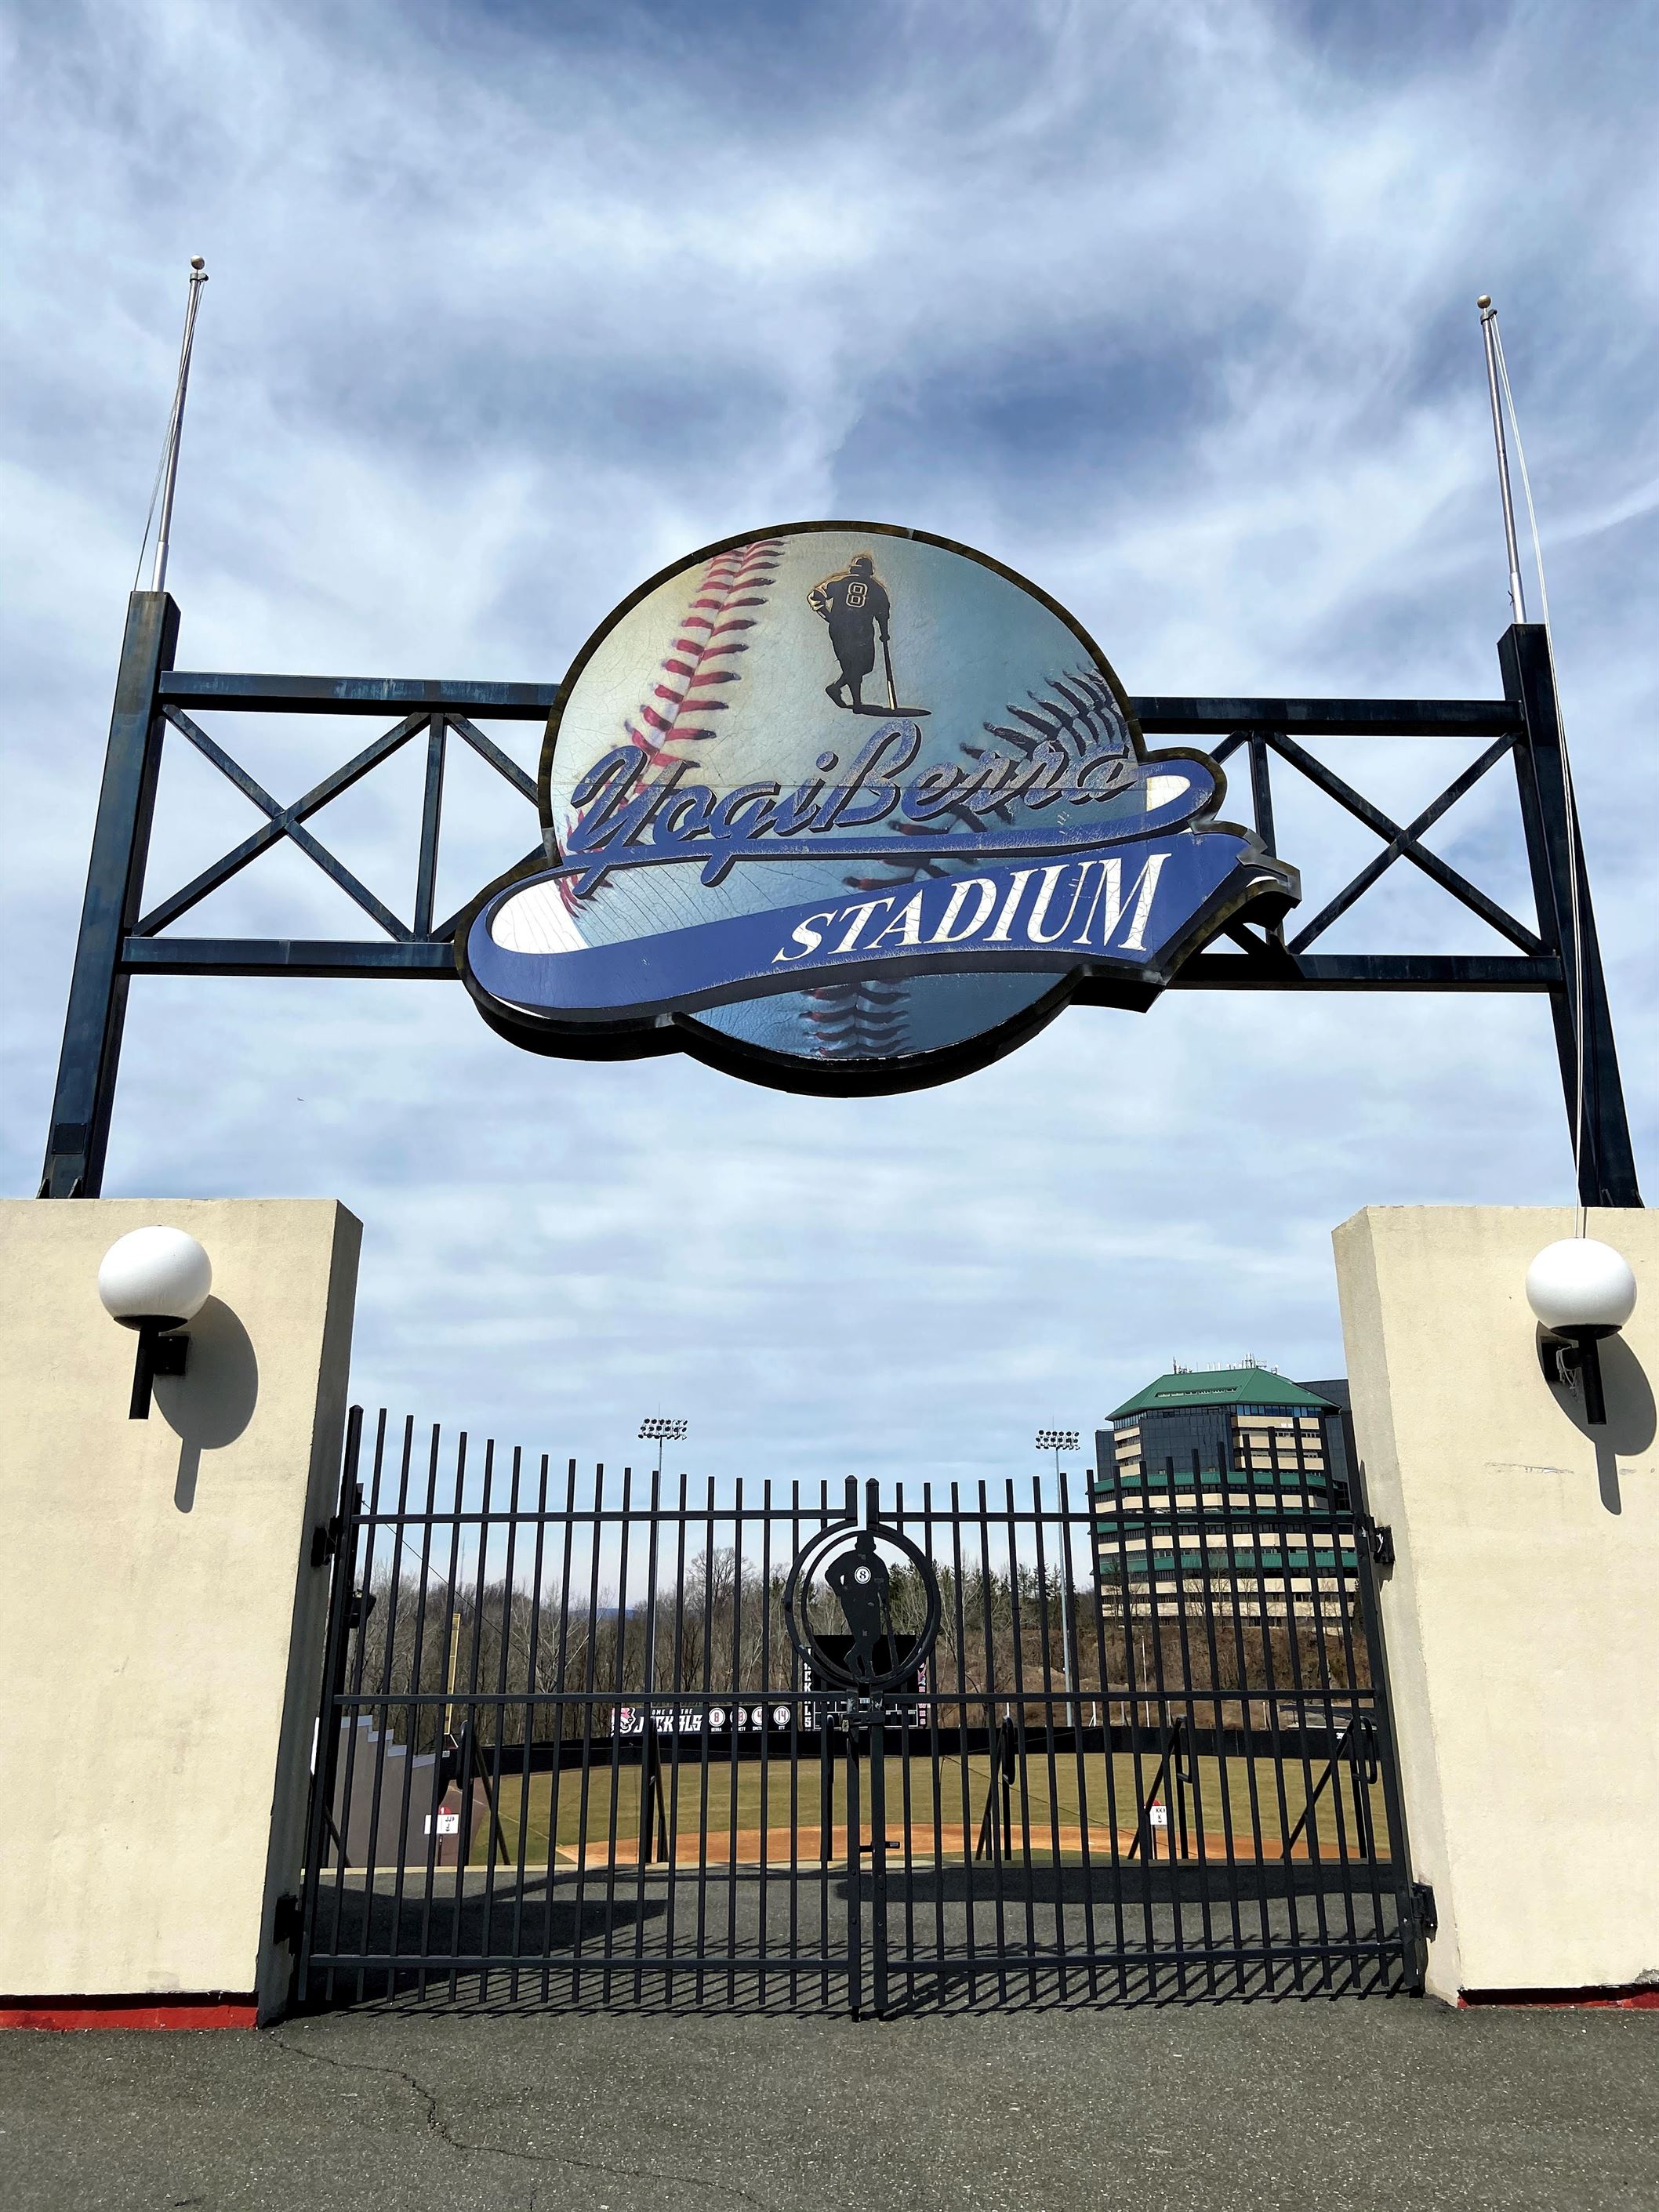 Since Yogi Berra Stadium is closed, baseball players have to find other ways to stay in touch with the game. Ben Caplan | The Montclarion